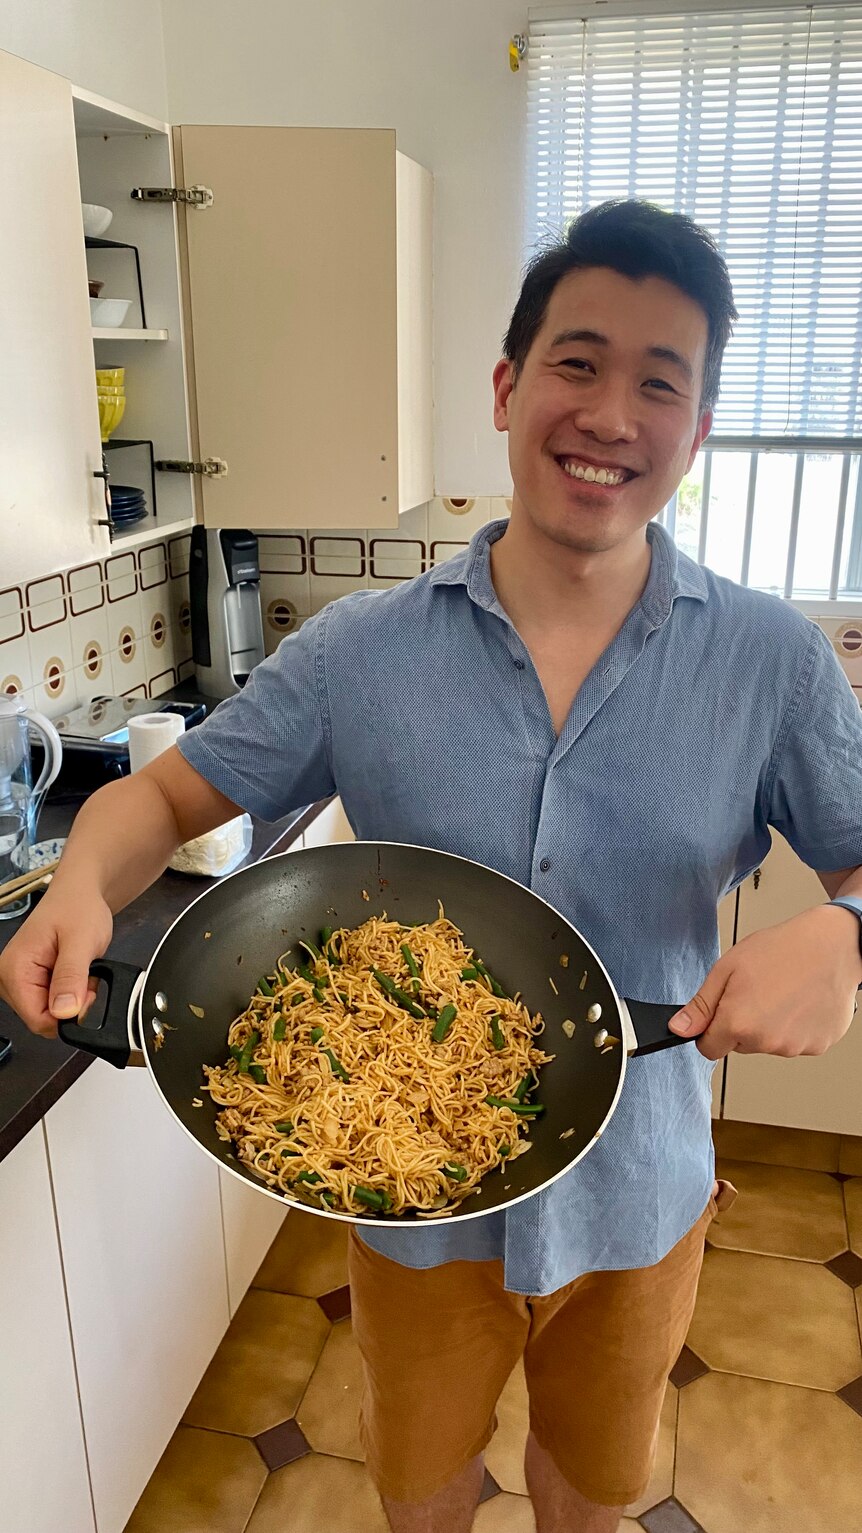 A young man of Asian appearance stanbds in a kitchen, smiling, and holding a wok filled with a noodle stir-fry.